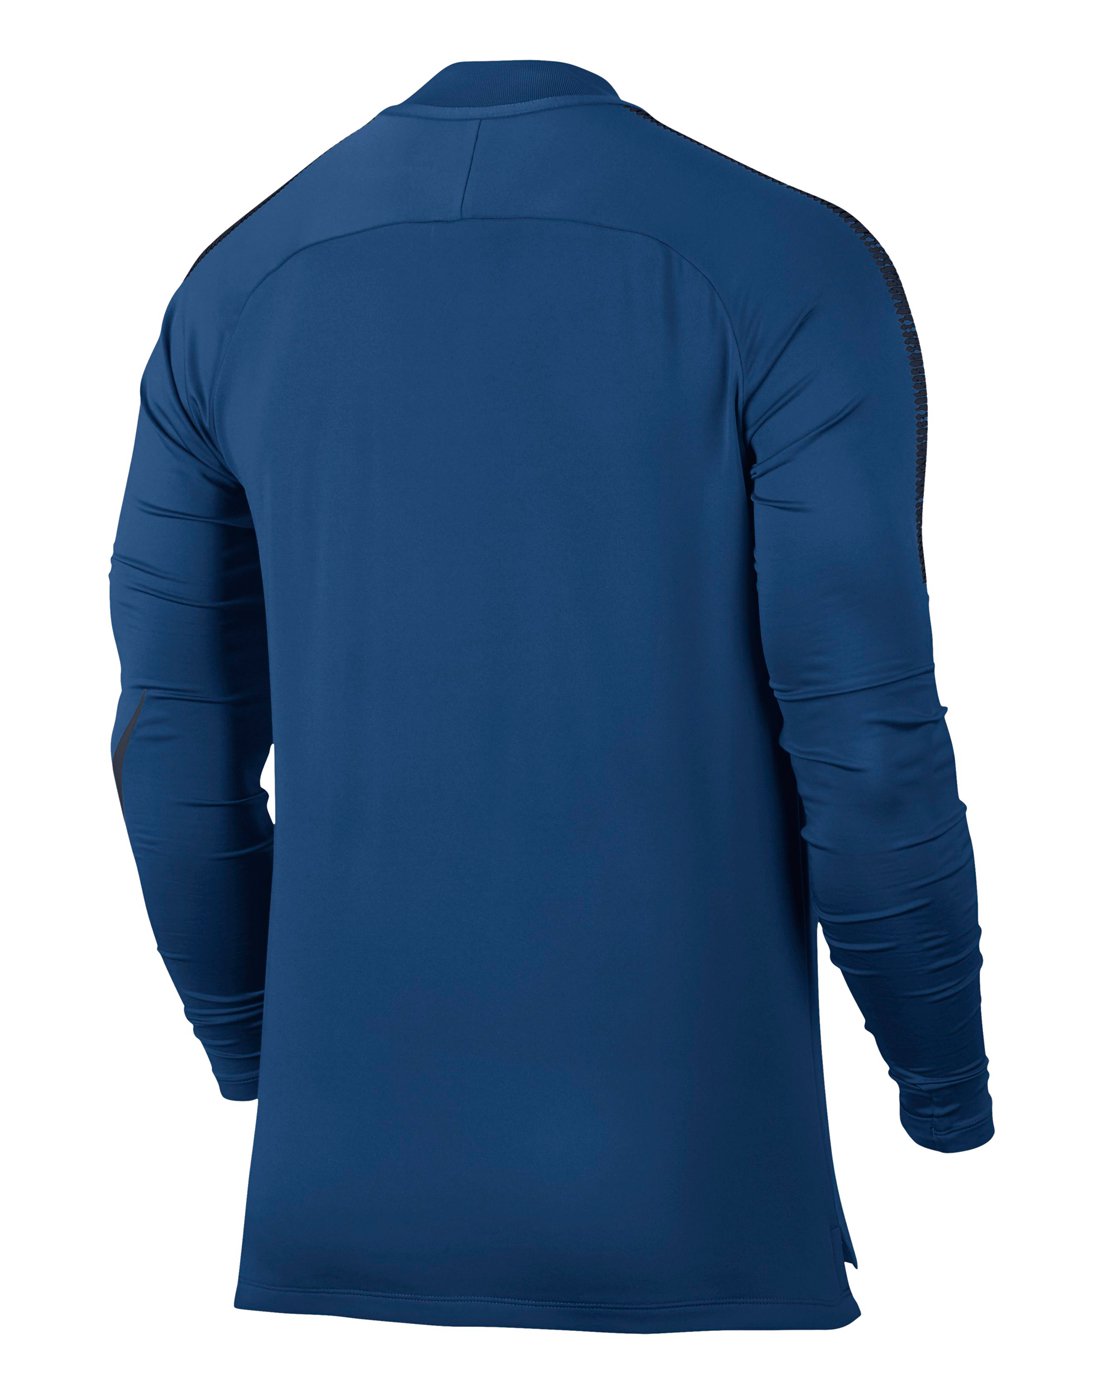 Nike Mens Dry Squad Dril Top - Navy | Life Style Sports IE